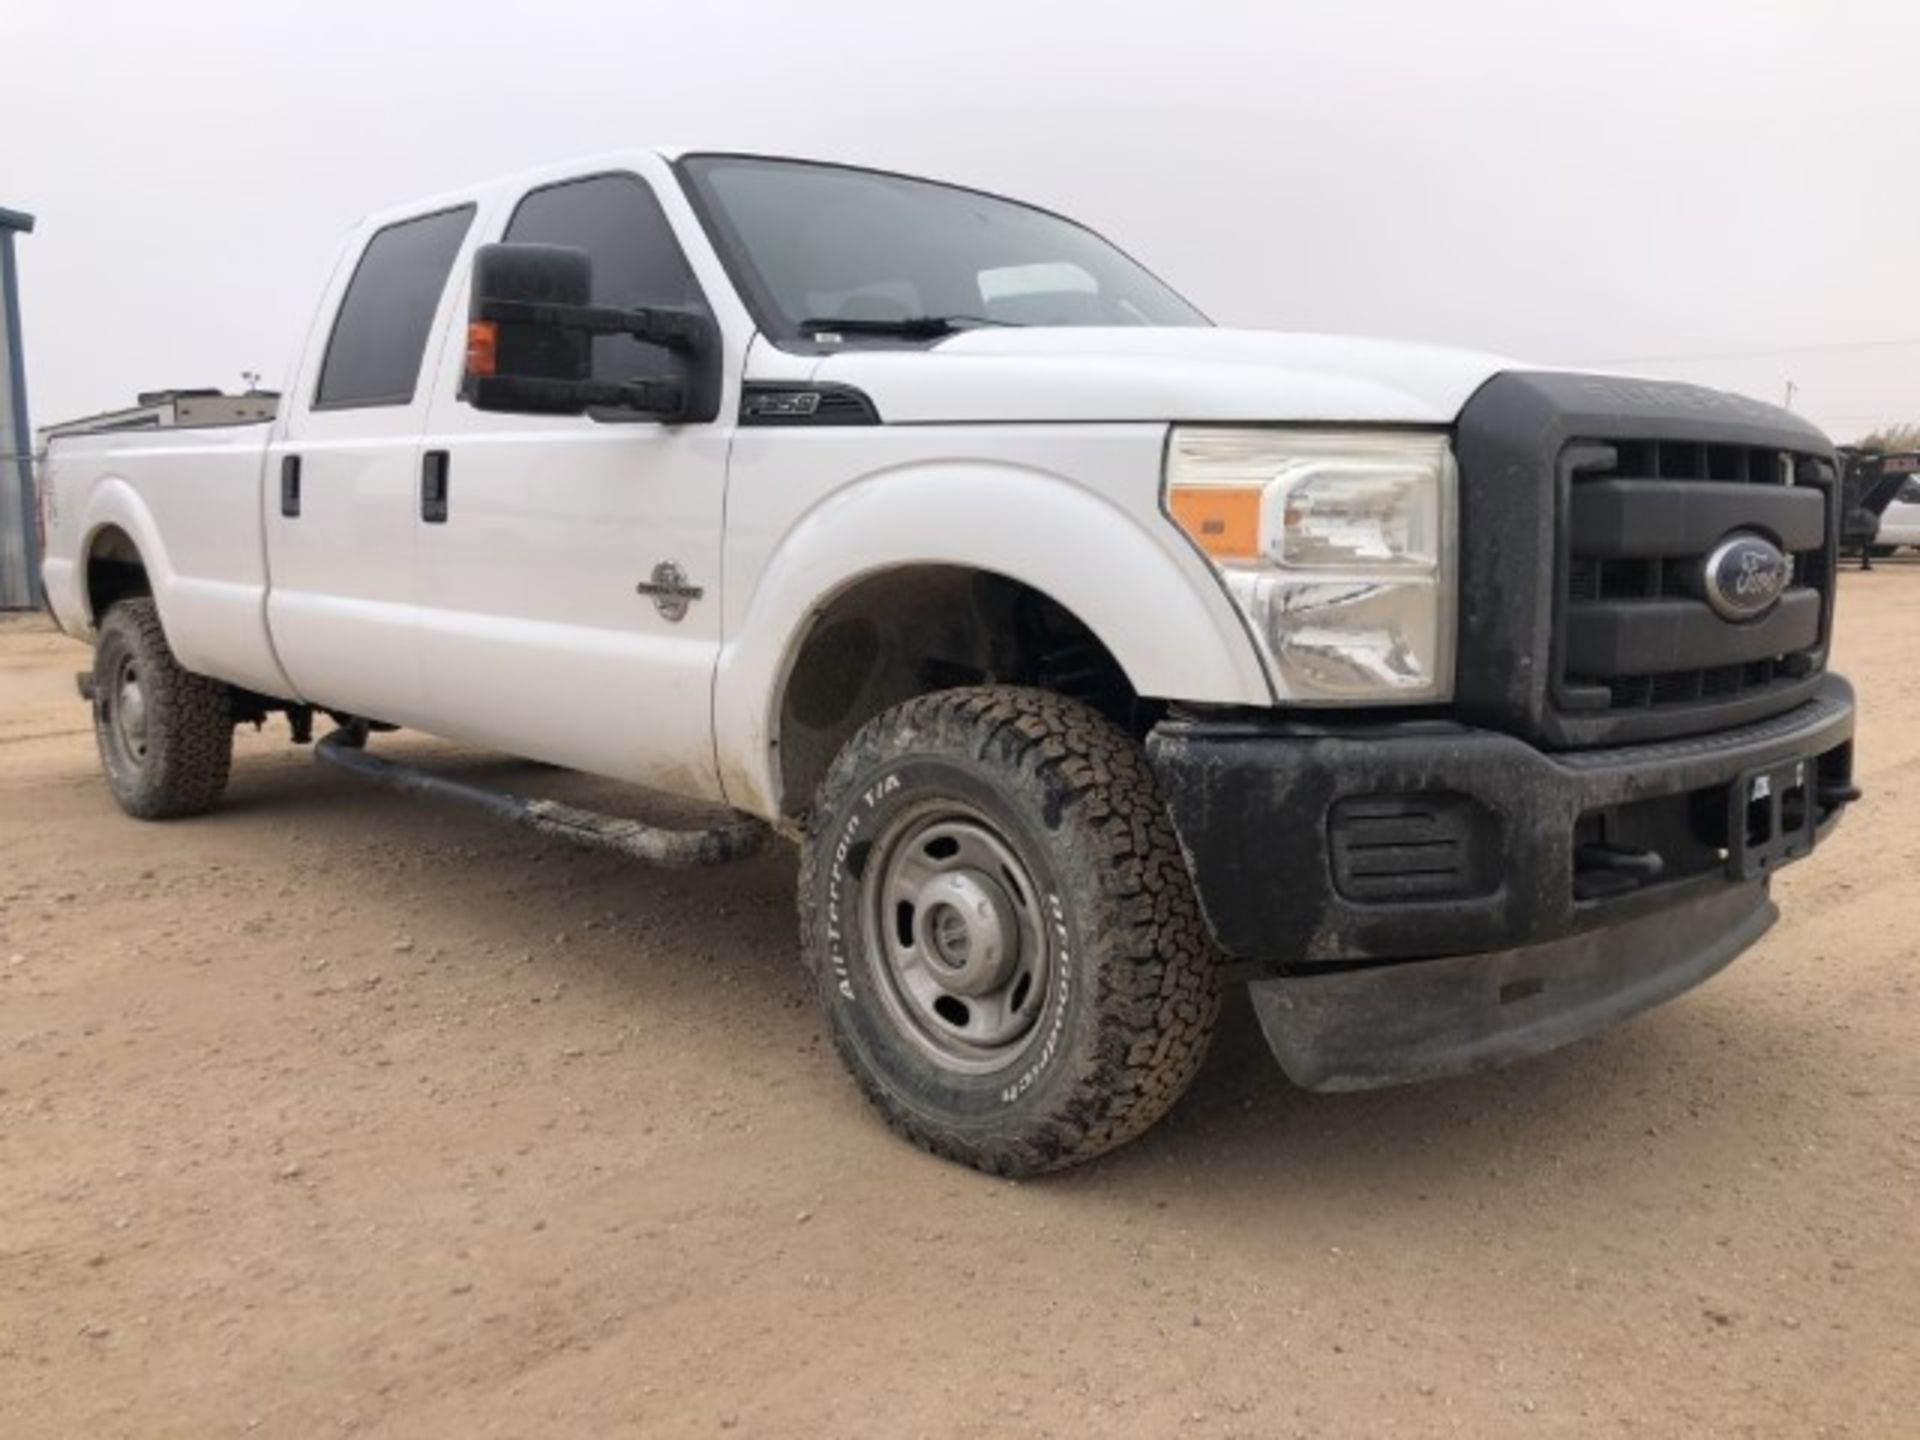 2013 Ford F-350 VIN: 1FT8W3BT4DEA16673 Odometer States: 176269 Color: White - Image 2 of 6